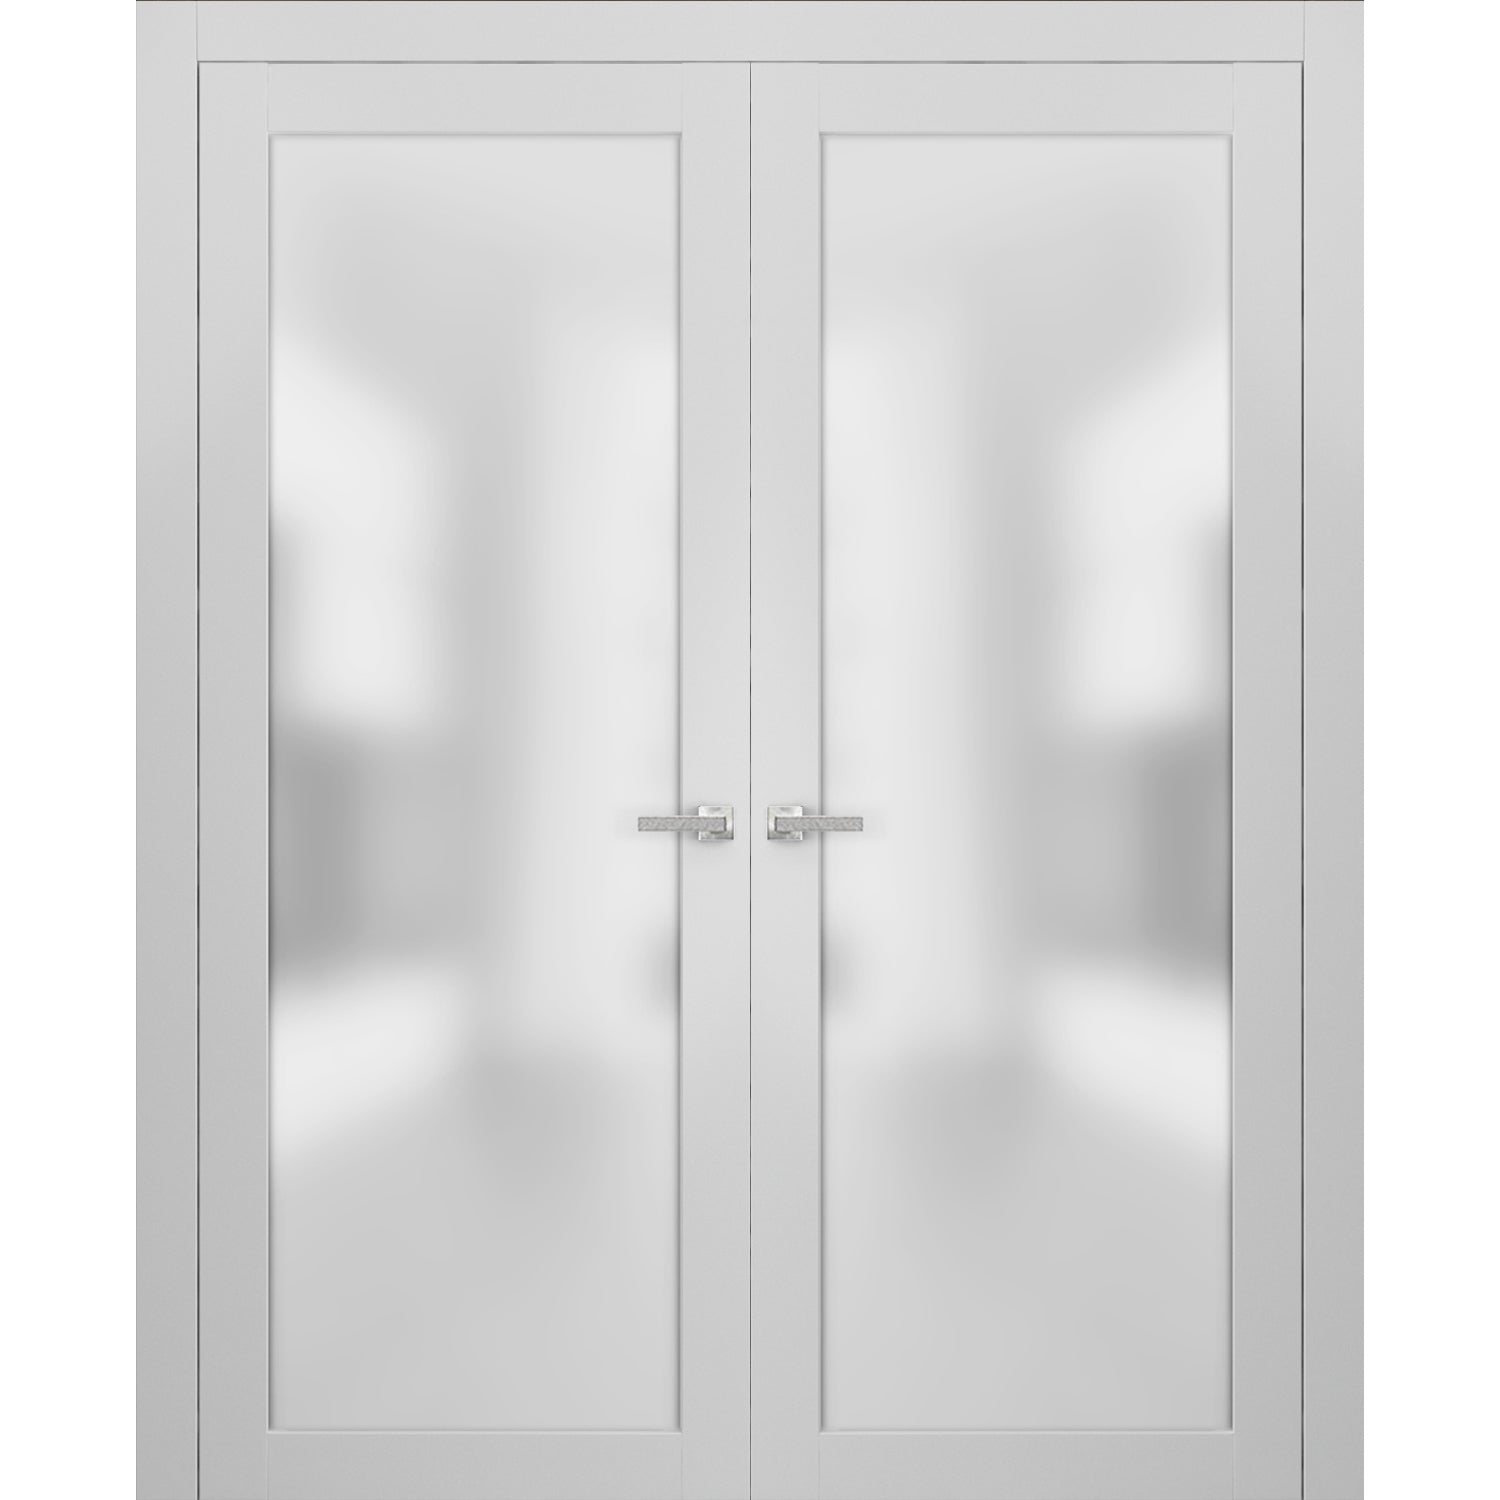 SARTODOORS French Double Frosted Glass Doors 60 x 84 | Planum 2102 White Silk | Frames Satin Nickel Hardware | Wooded Panels with Inserts 